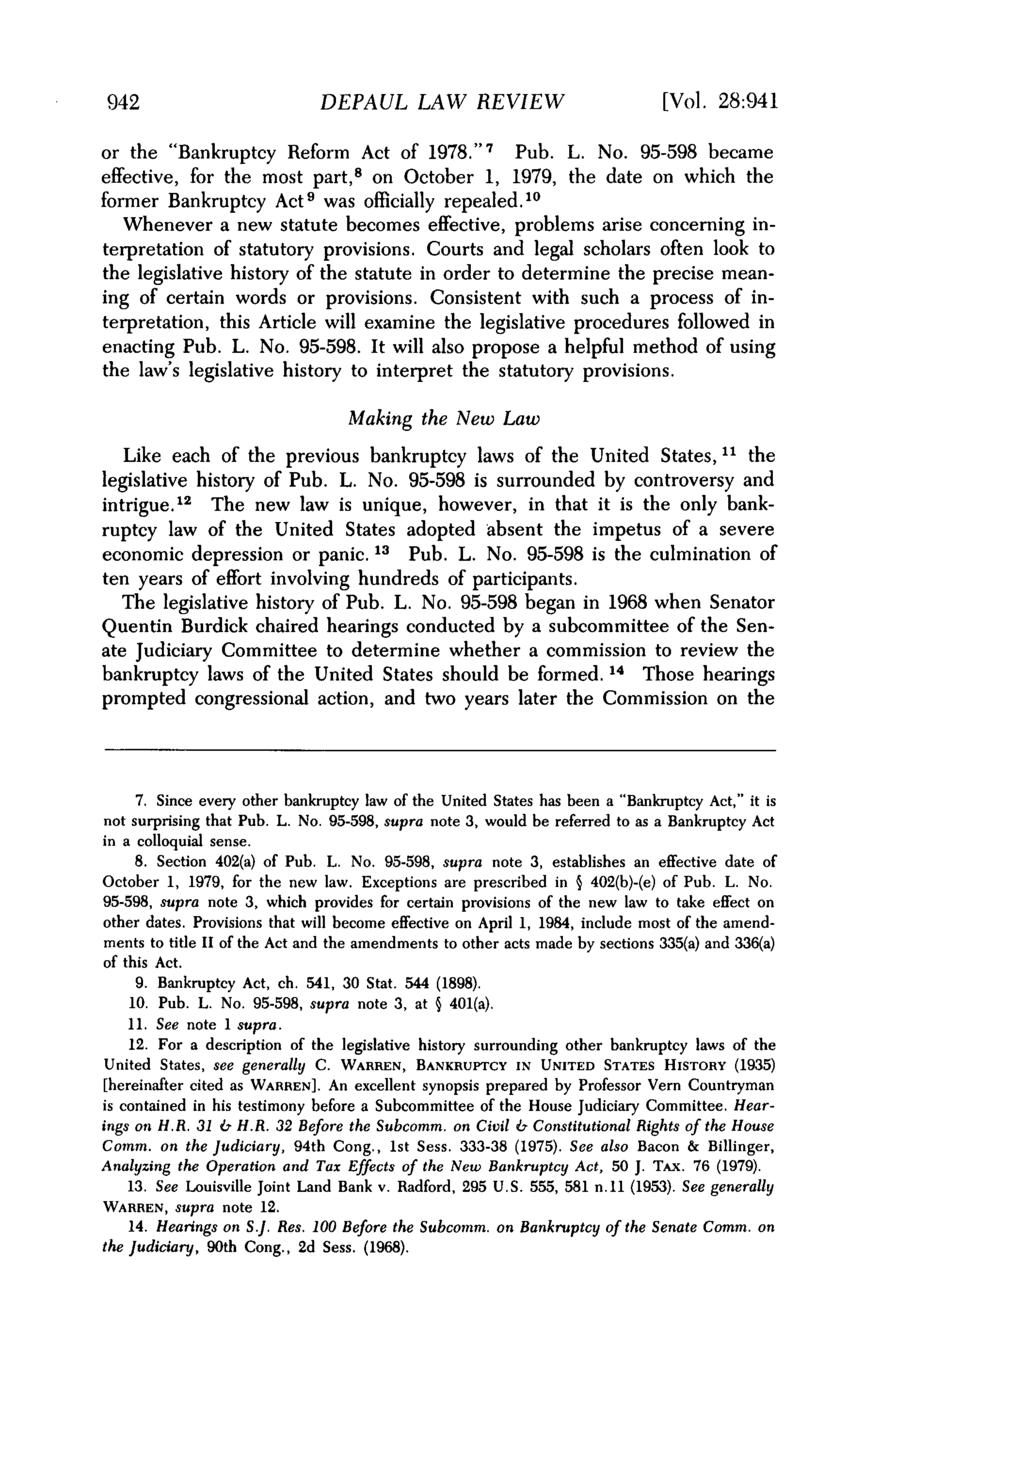 DEPAUL LAW REVIEW [Vol. 28:941 or the "Bankruptcy Reform Act of 1978." 7 Pub. L. No.